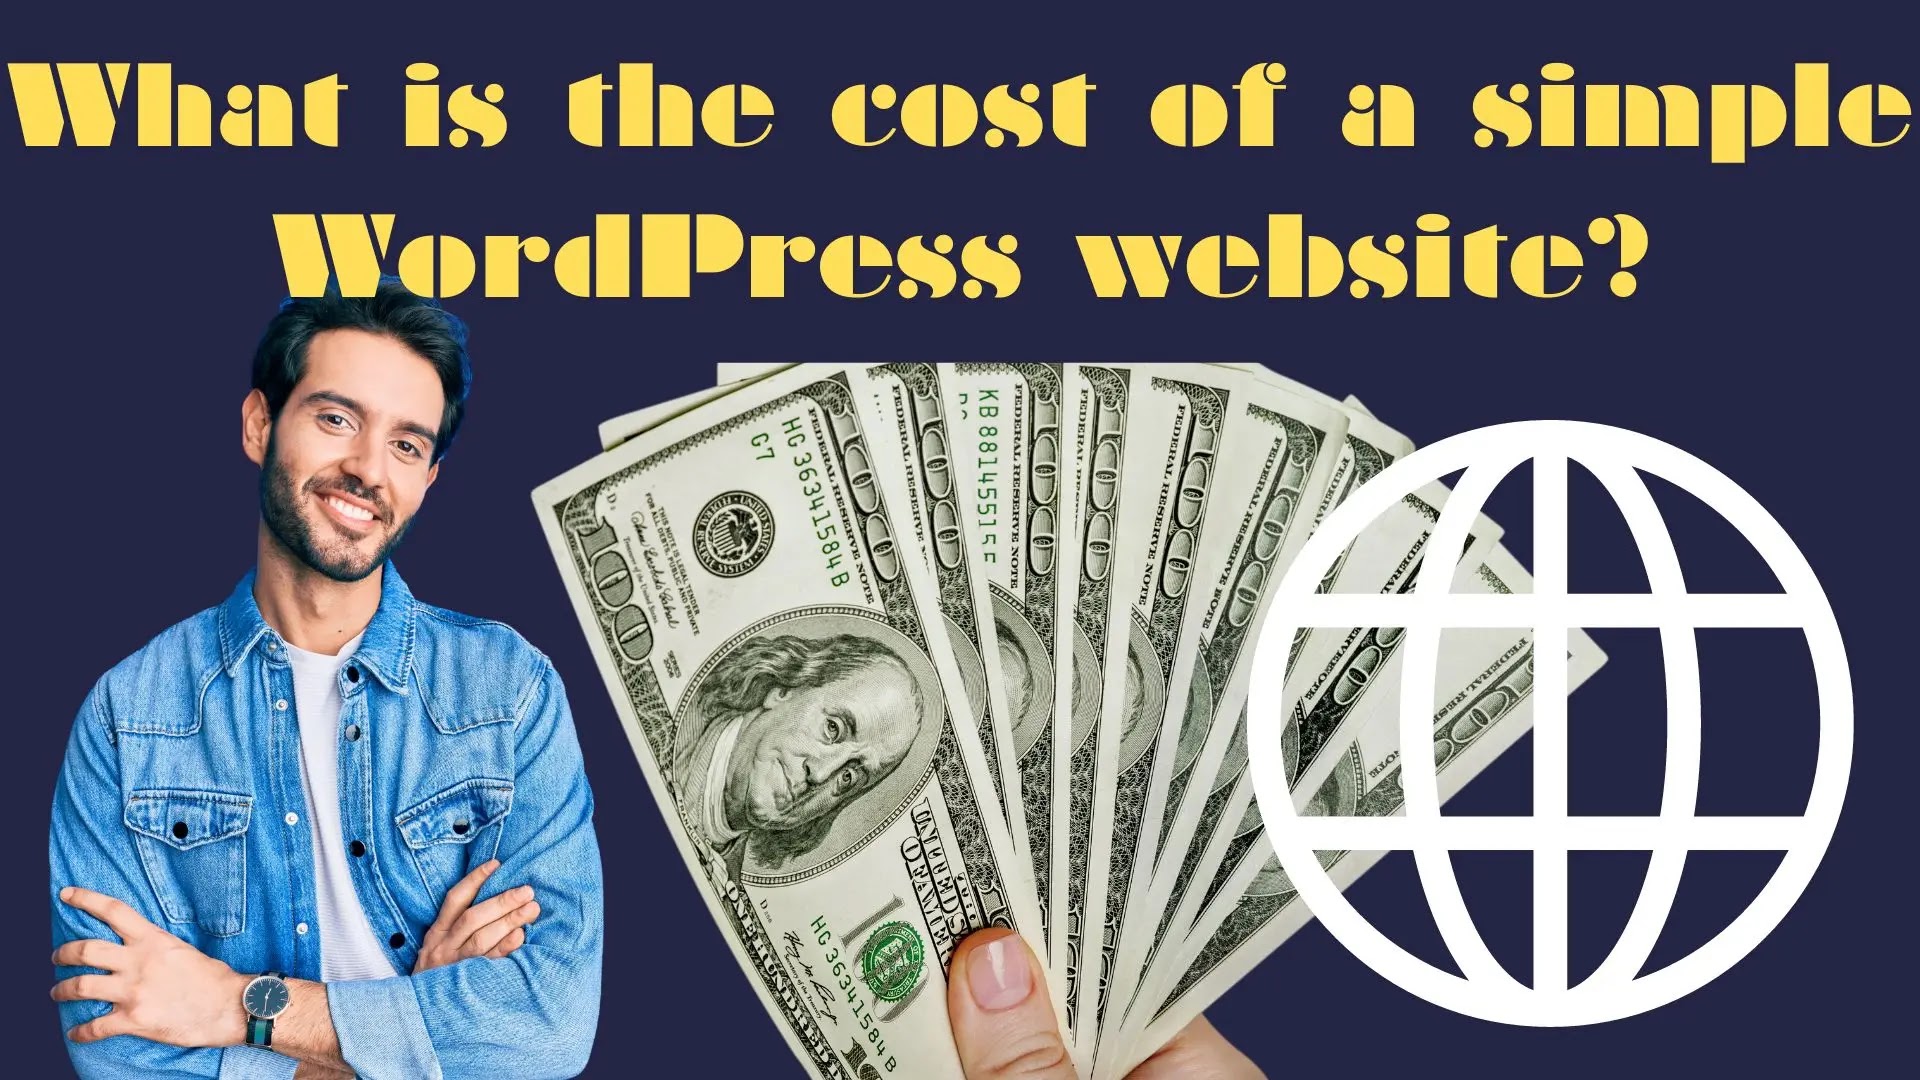 What is the cost of a simple WordPress website?